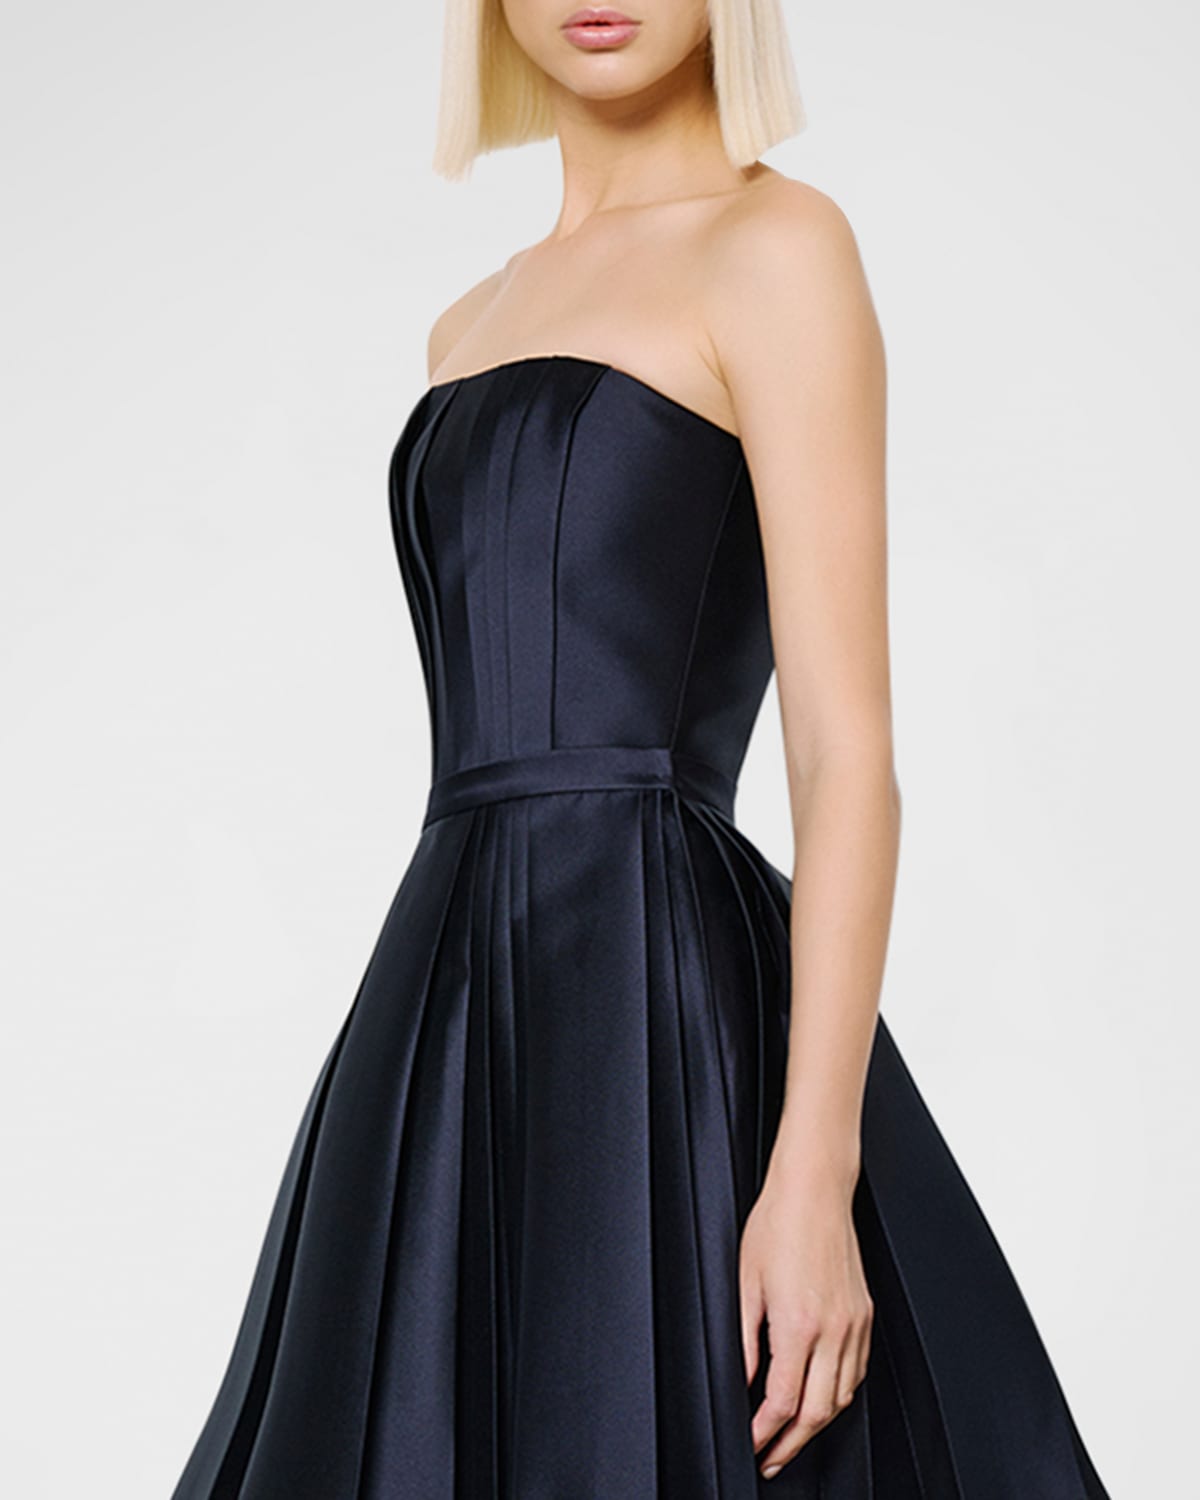 Dice Kayek Pleated Strapless Bustier Top In Navy